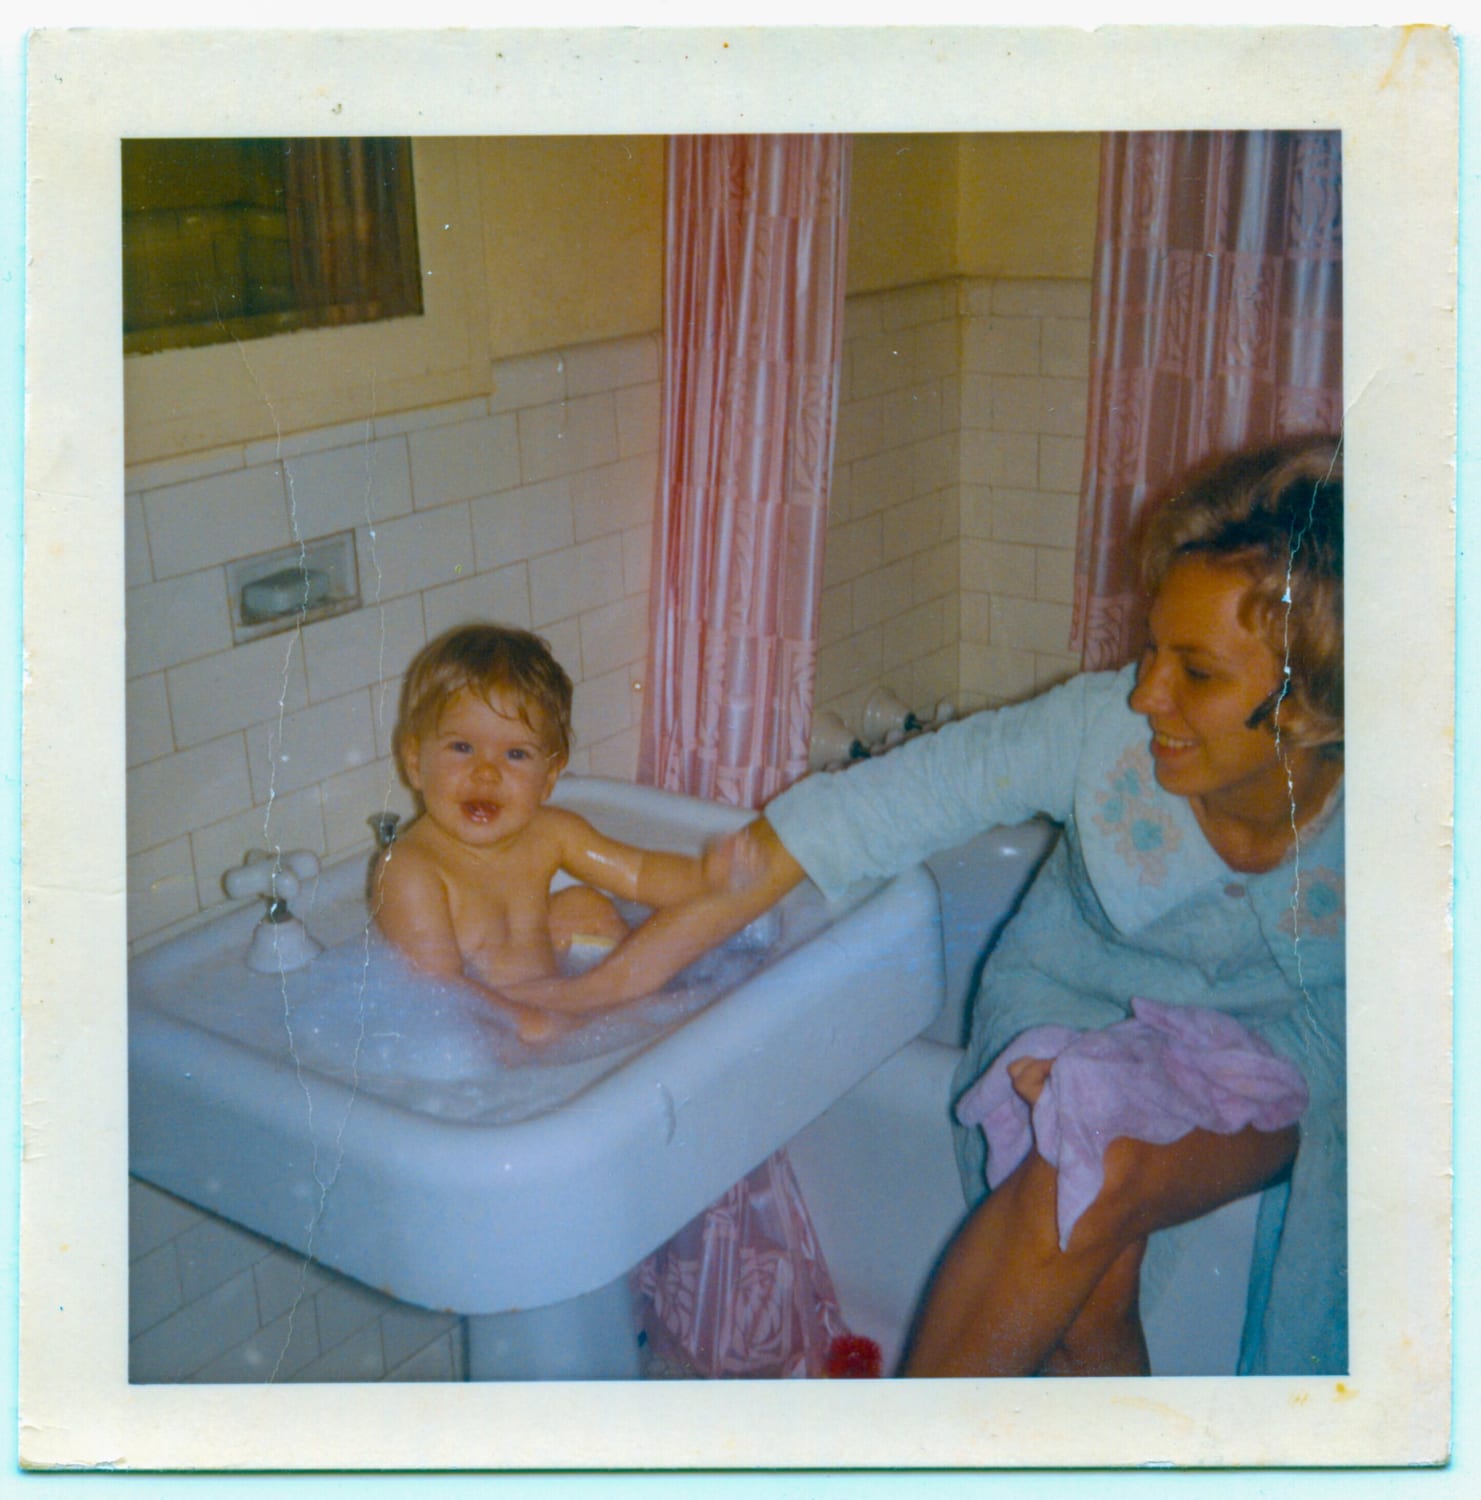 Bath time 1960s. Scan by Martin Snelling from a found photograph